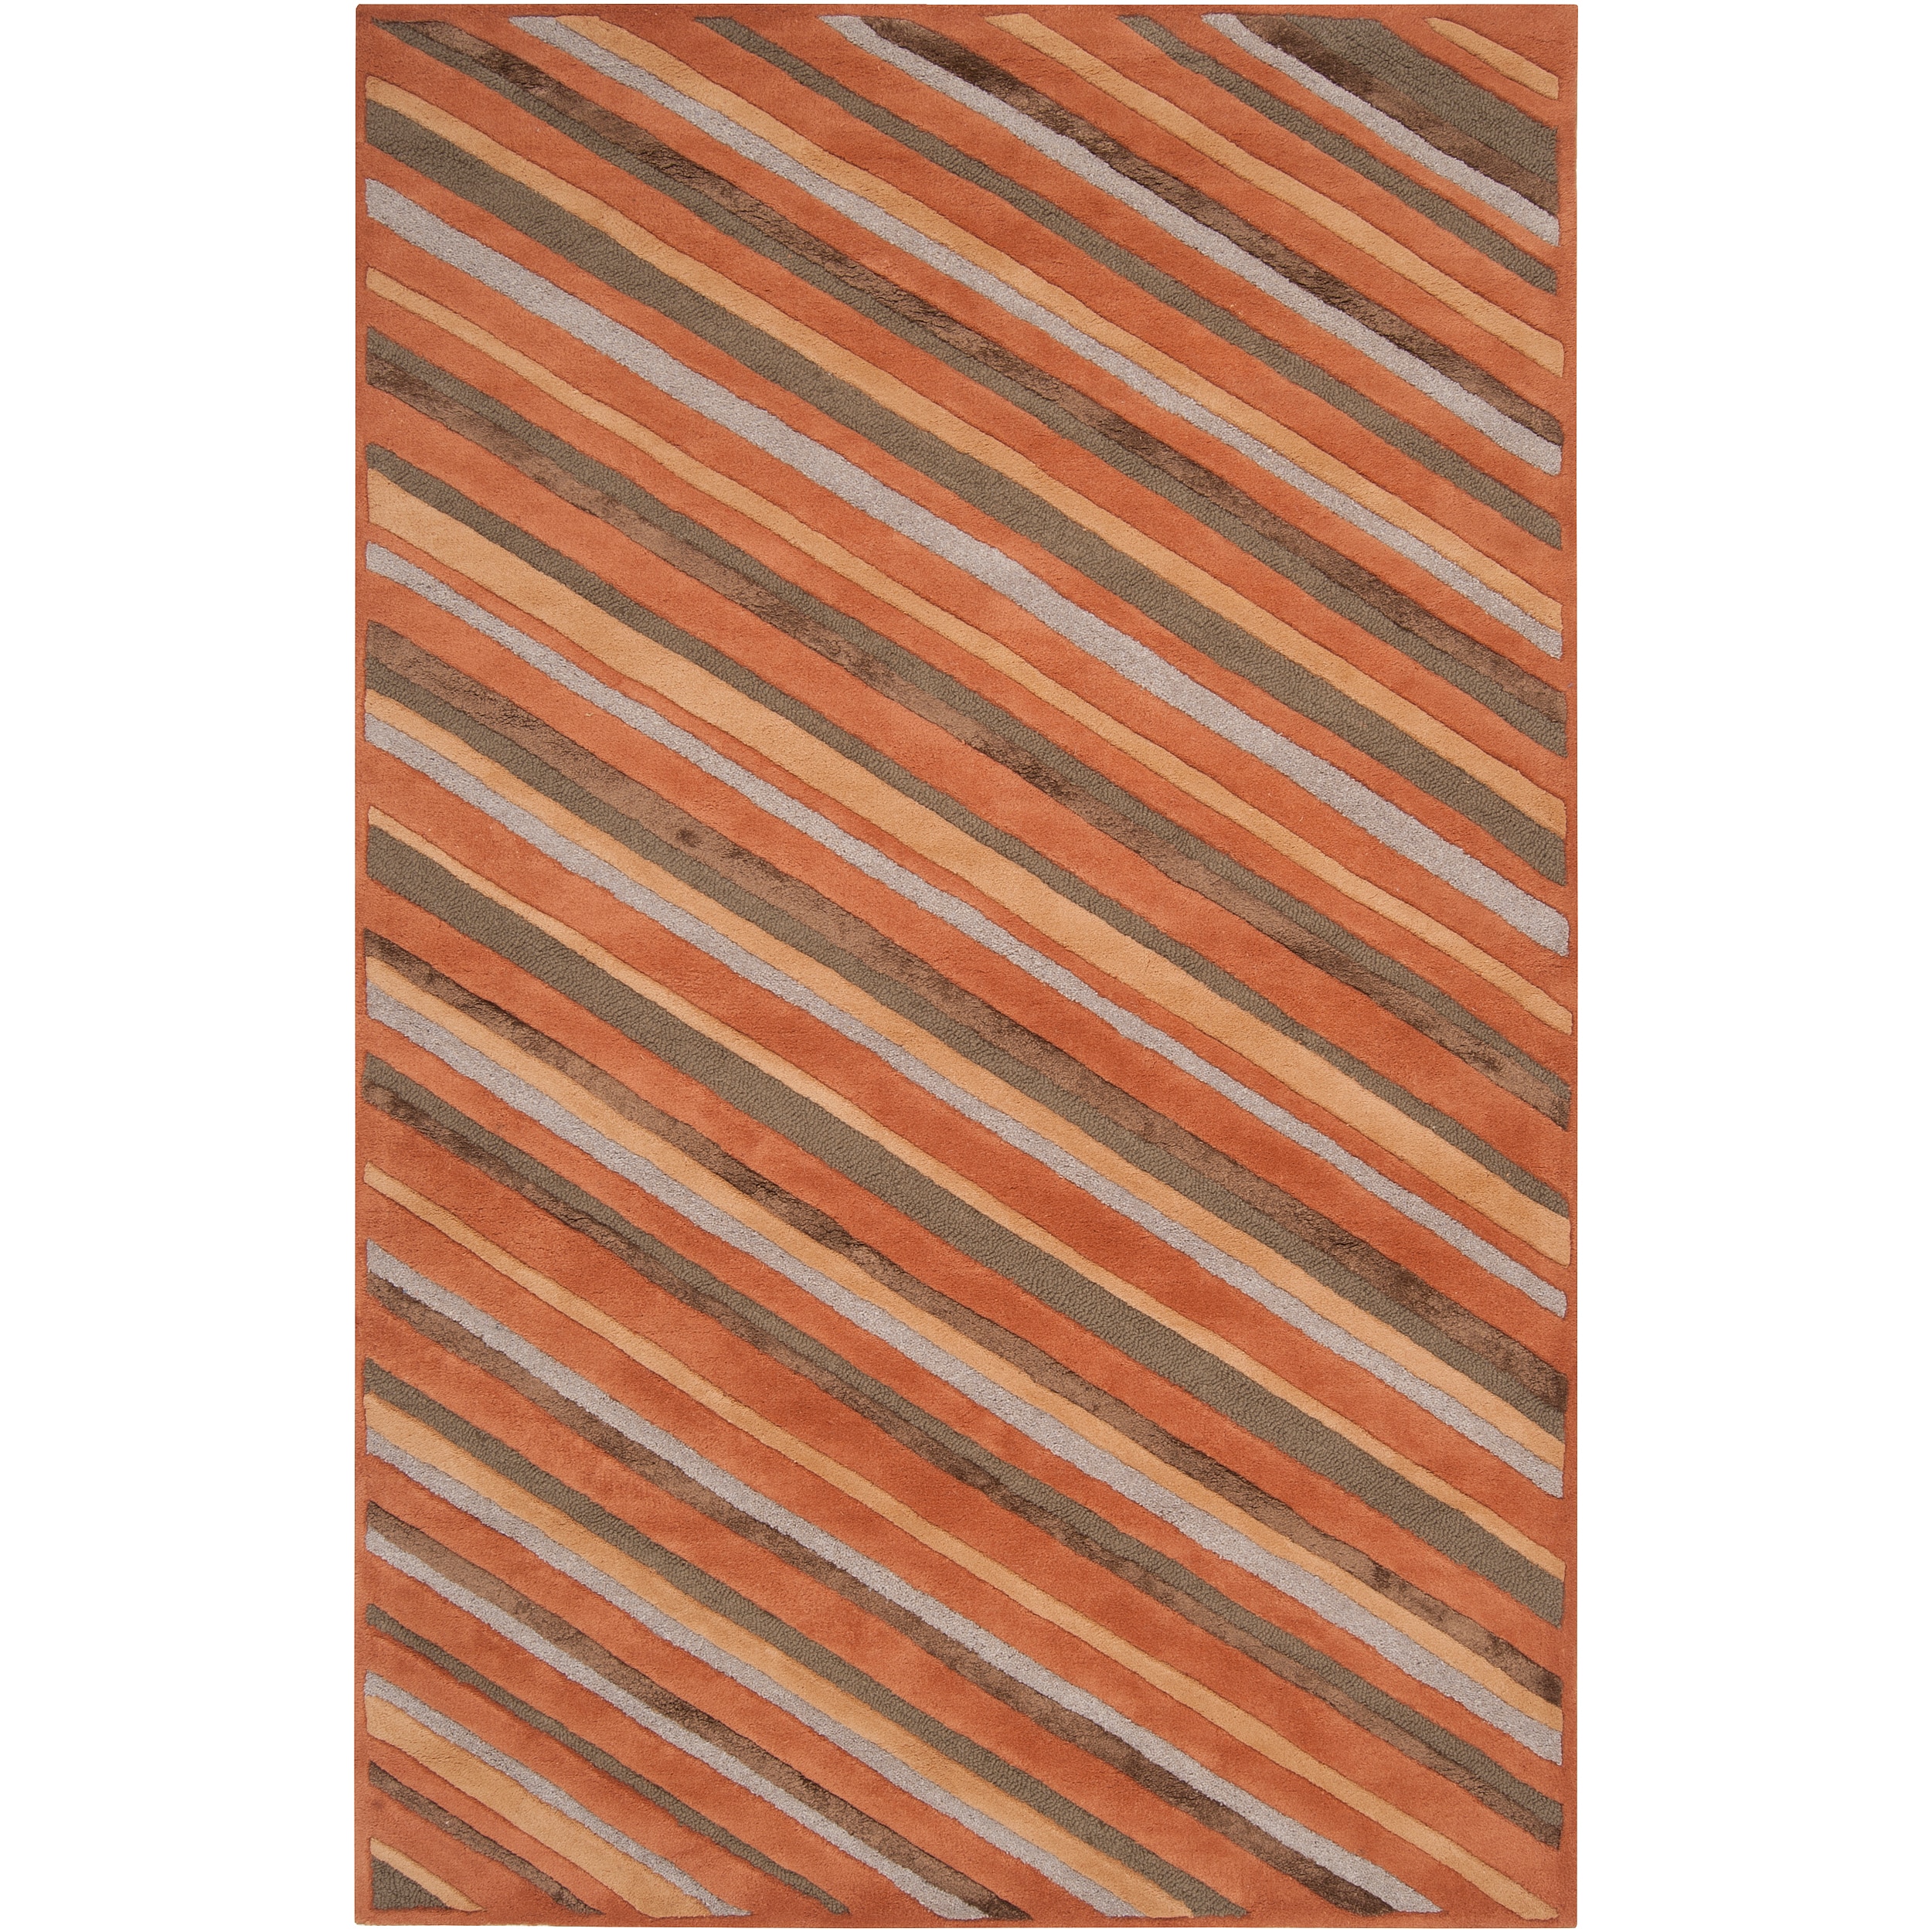 Candice Olson Hand tufted Brown Cane Diagonal Stripes Wool Area Rug (8 X 11)